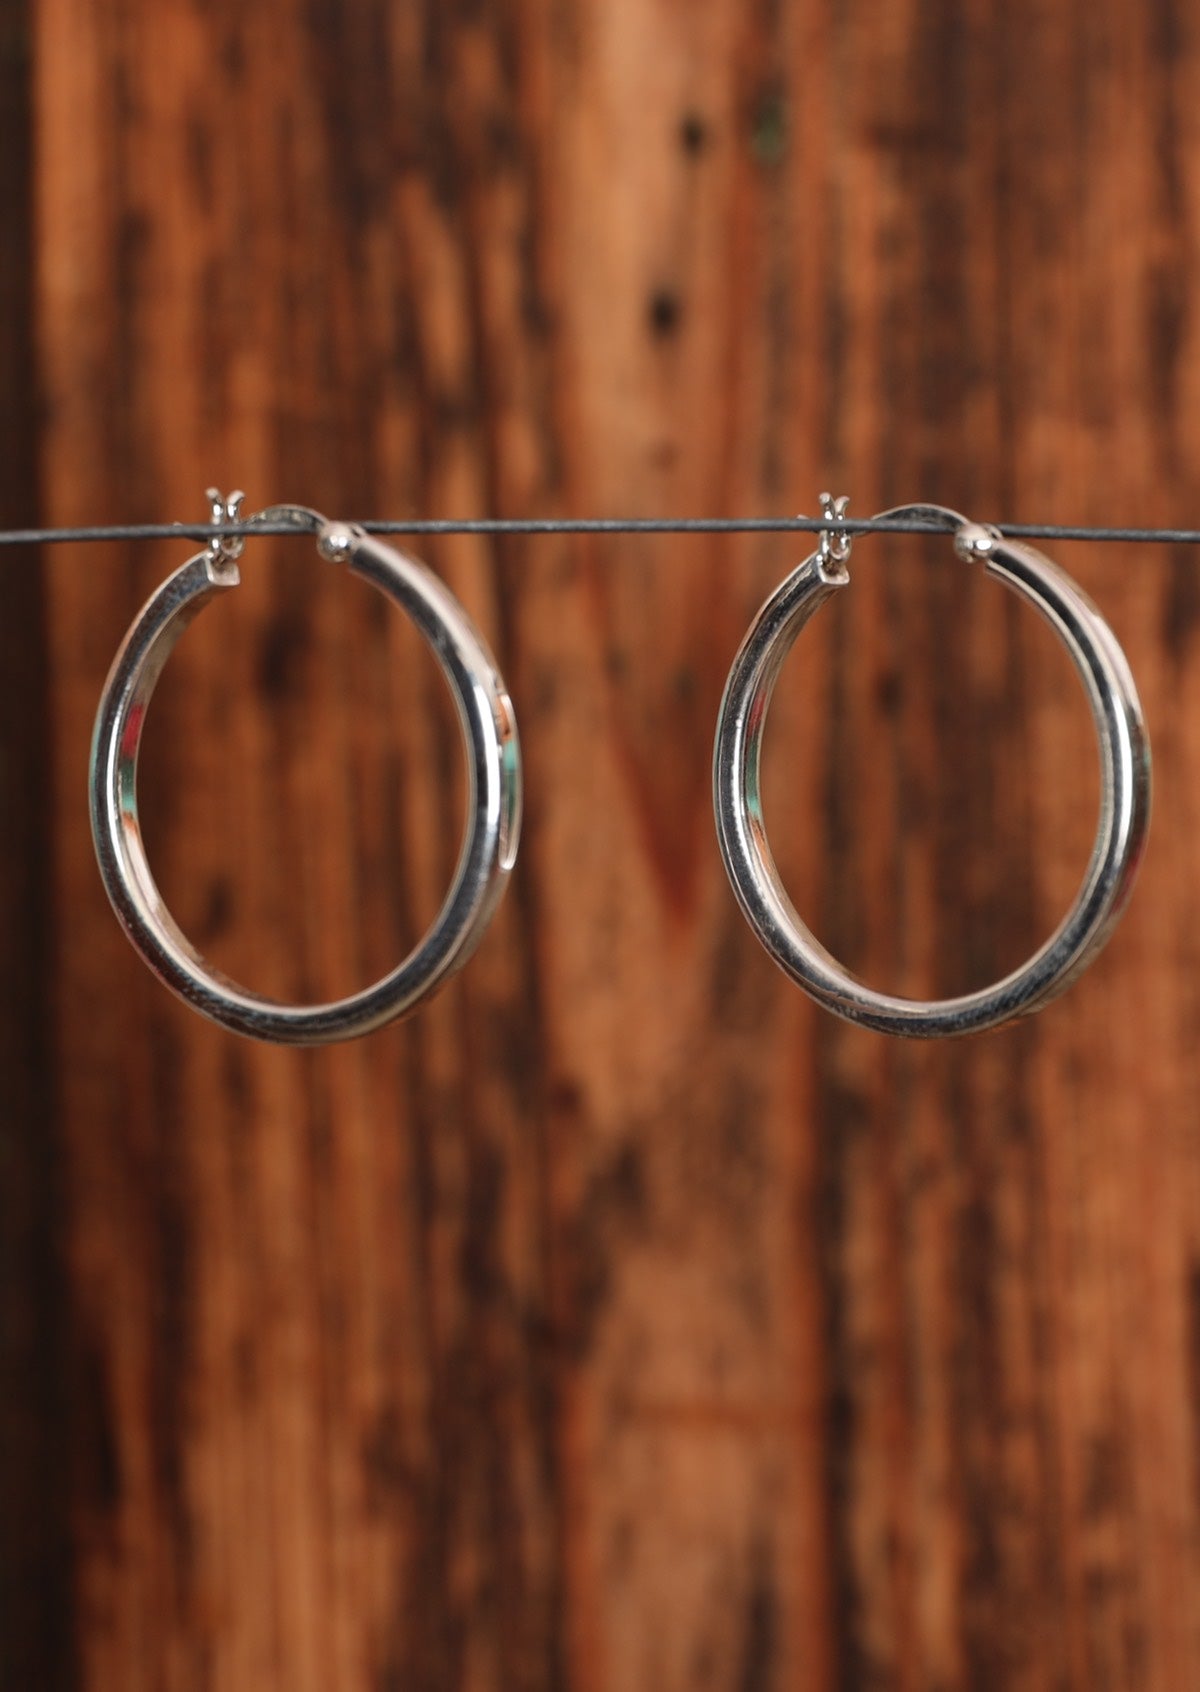 92.5% silver chunky hoop earrings sitting on a wire for display.